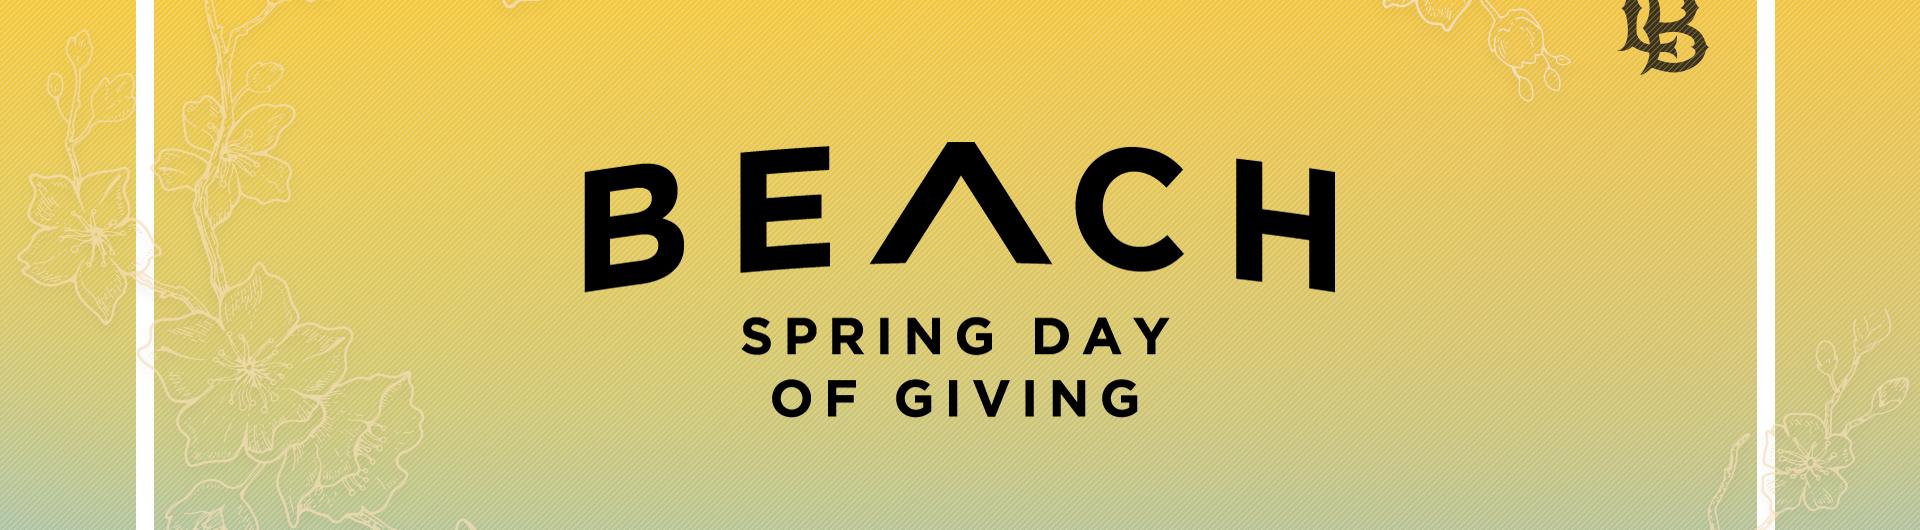 Beach Spring Day of Giving graphic